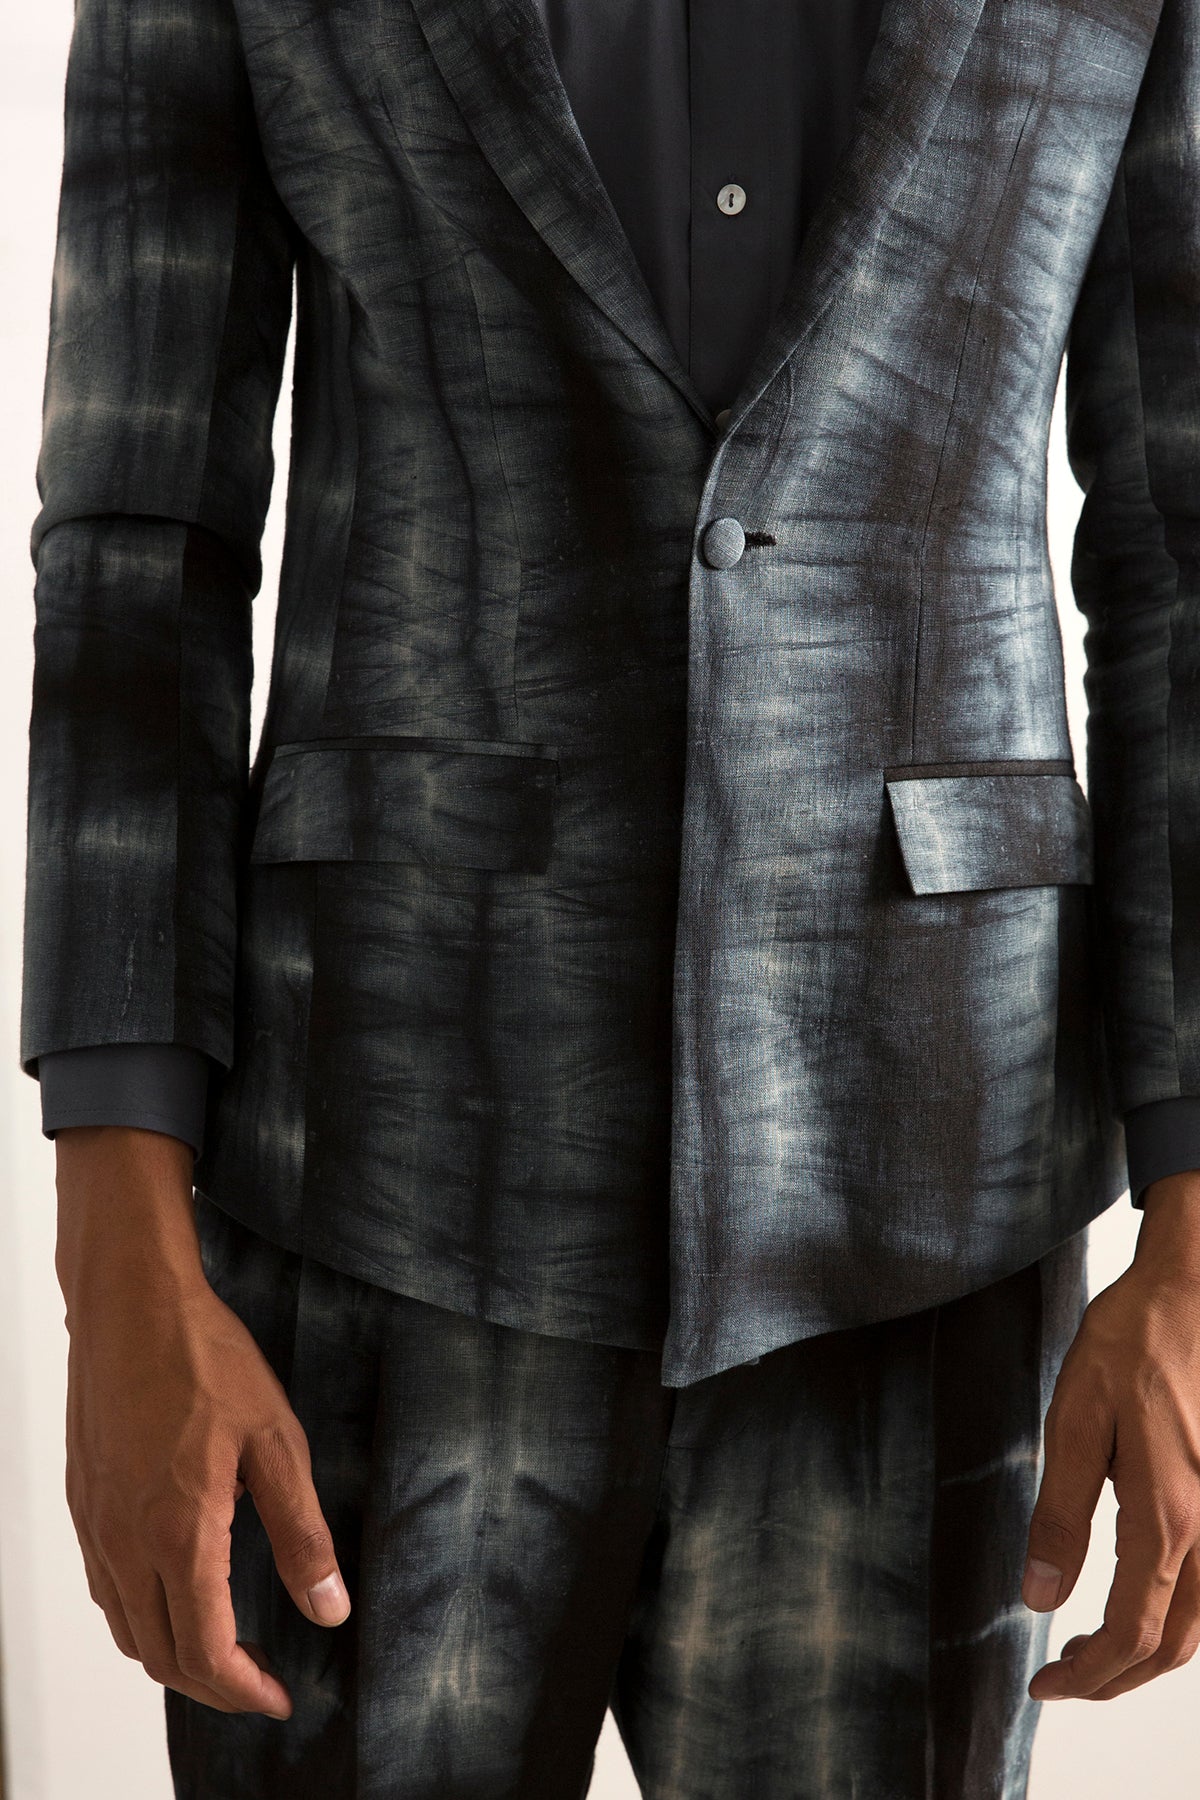 Verne Set - Grey Collarless Shirt with Tie & Dye Classic Suit Set